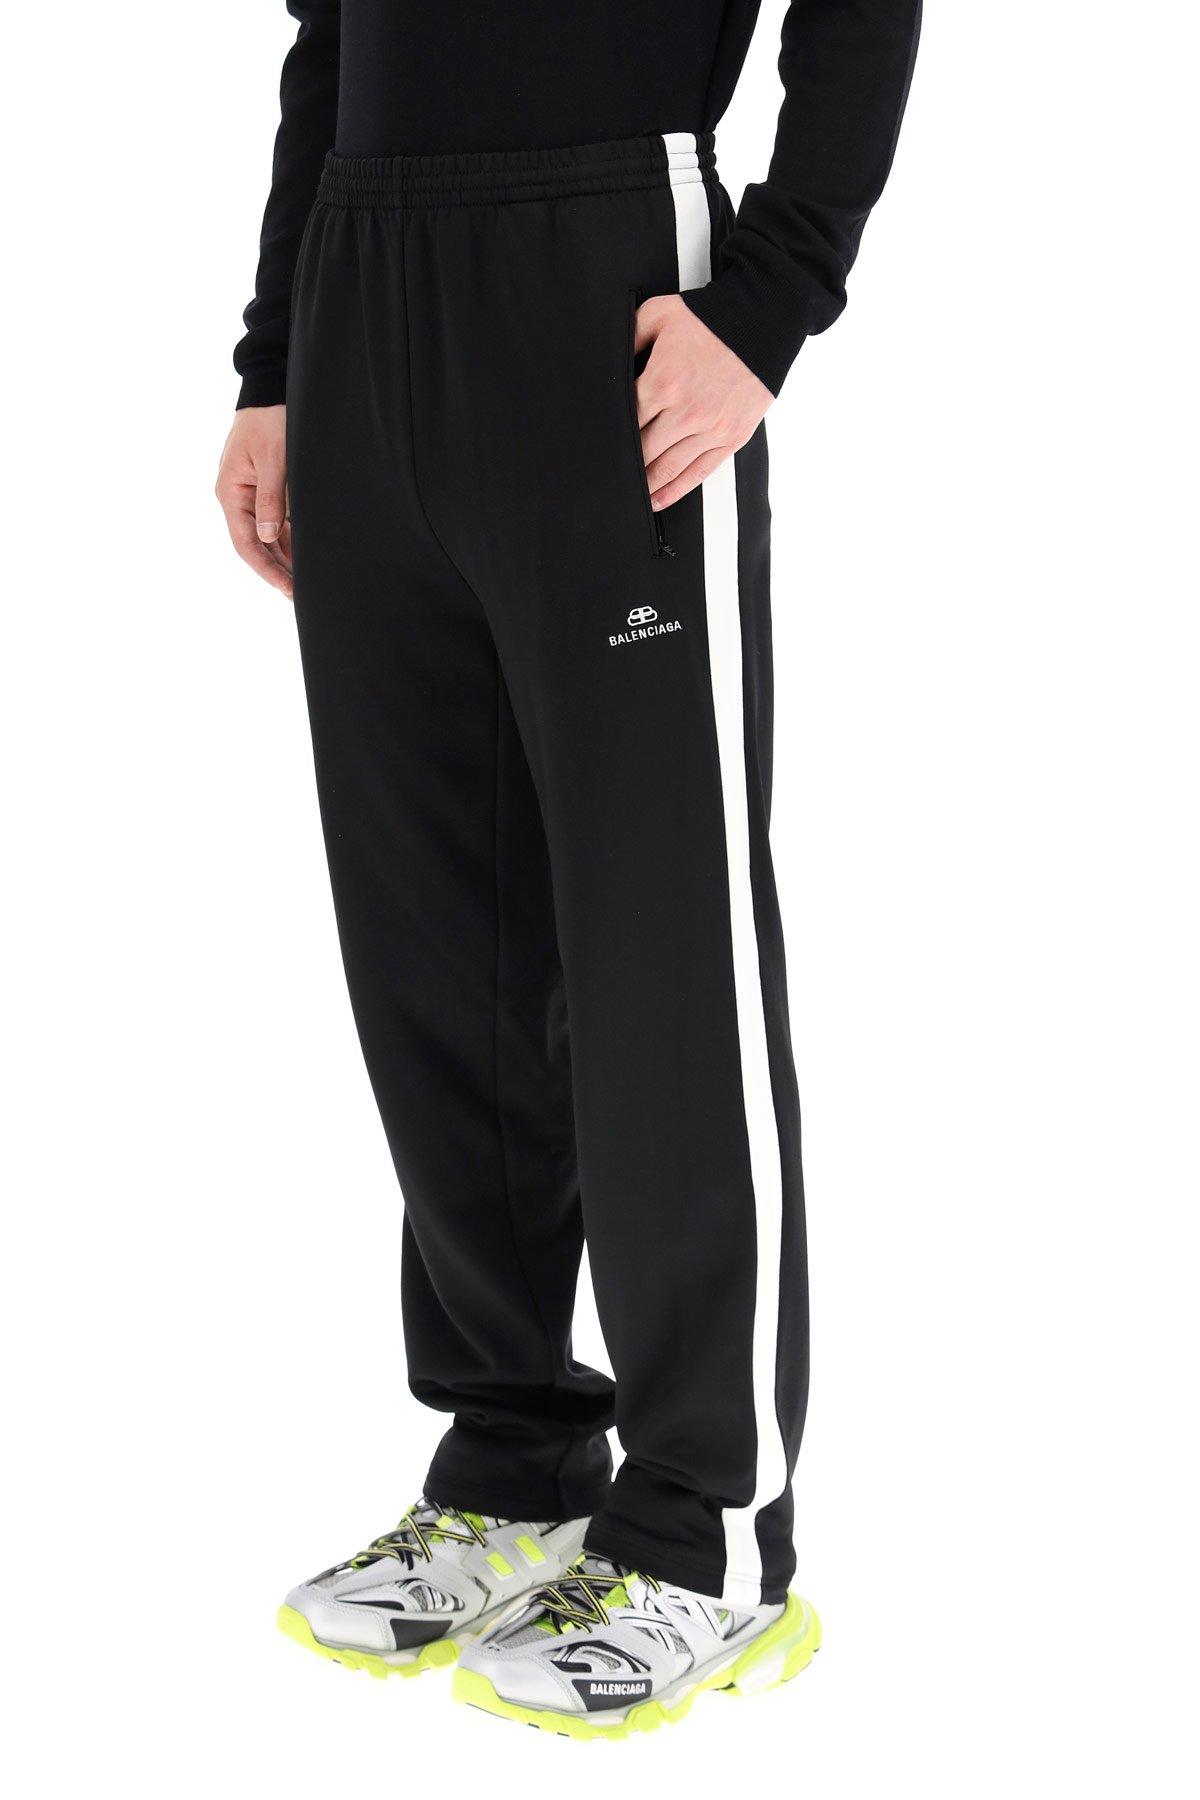 Balenciaga Cotton Sweatpants With Side Bands in Black for Men - Save 8% ...